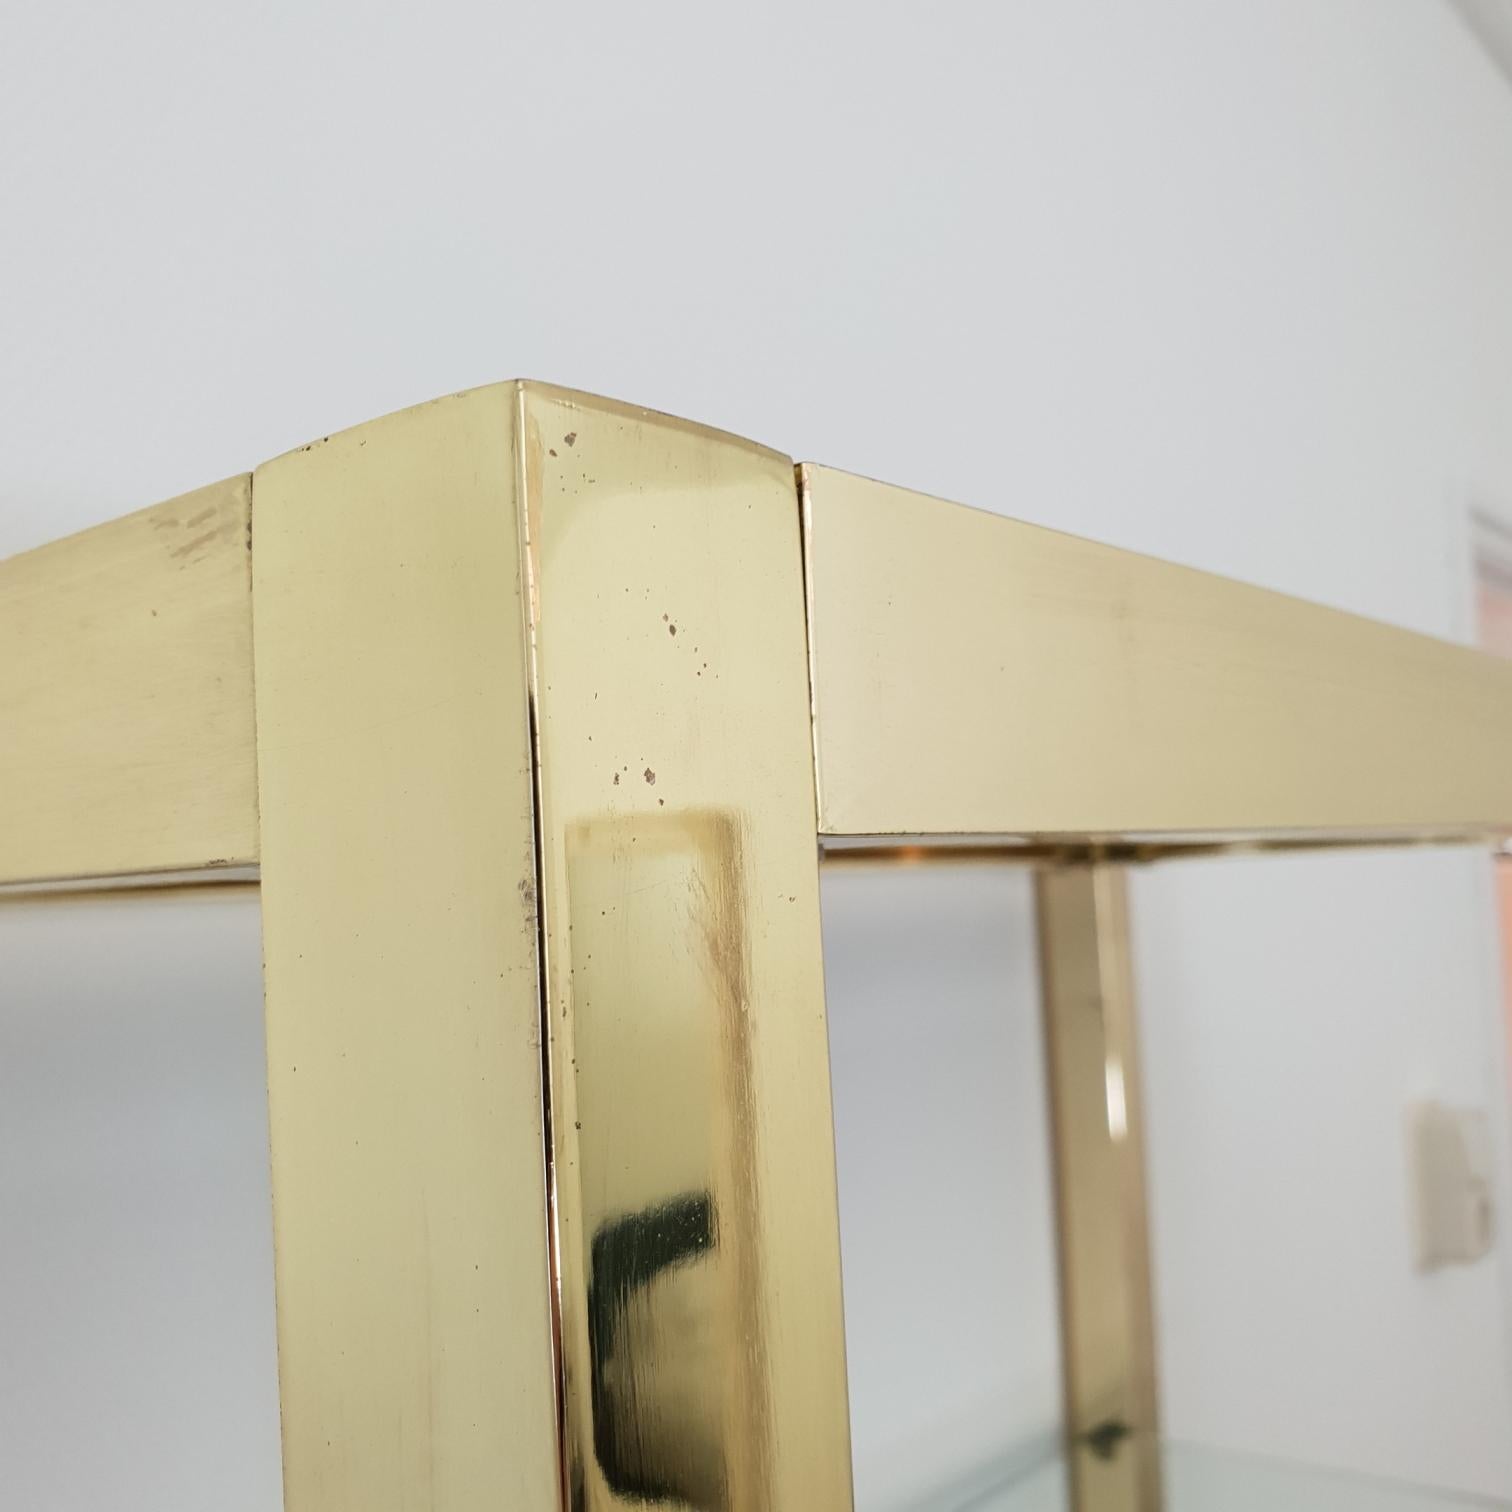 Italian Mid-Century Modern Gold Plated Shelving Unit Étagère, 1970s For Sale 3